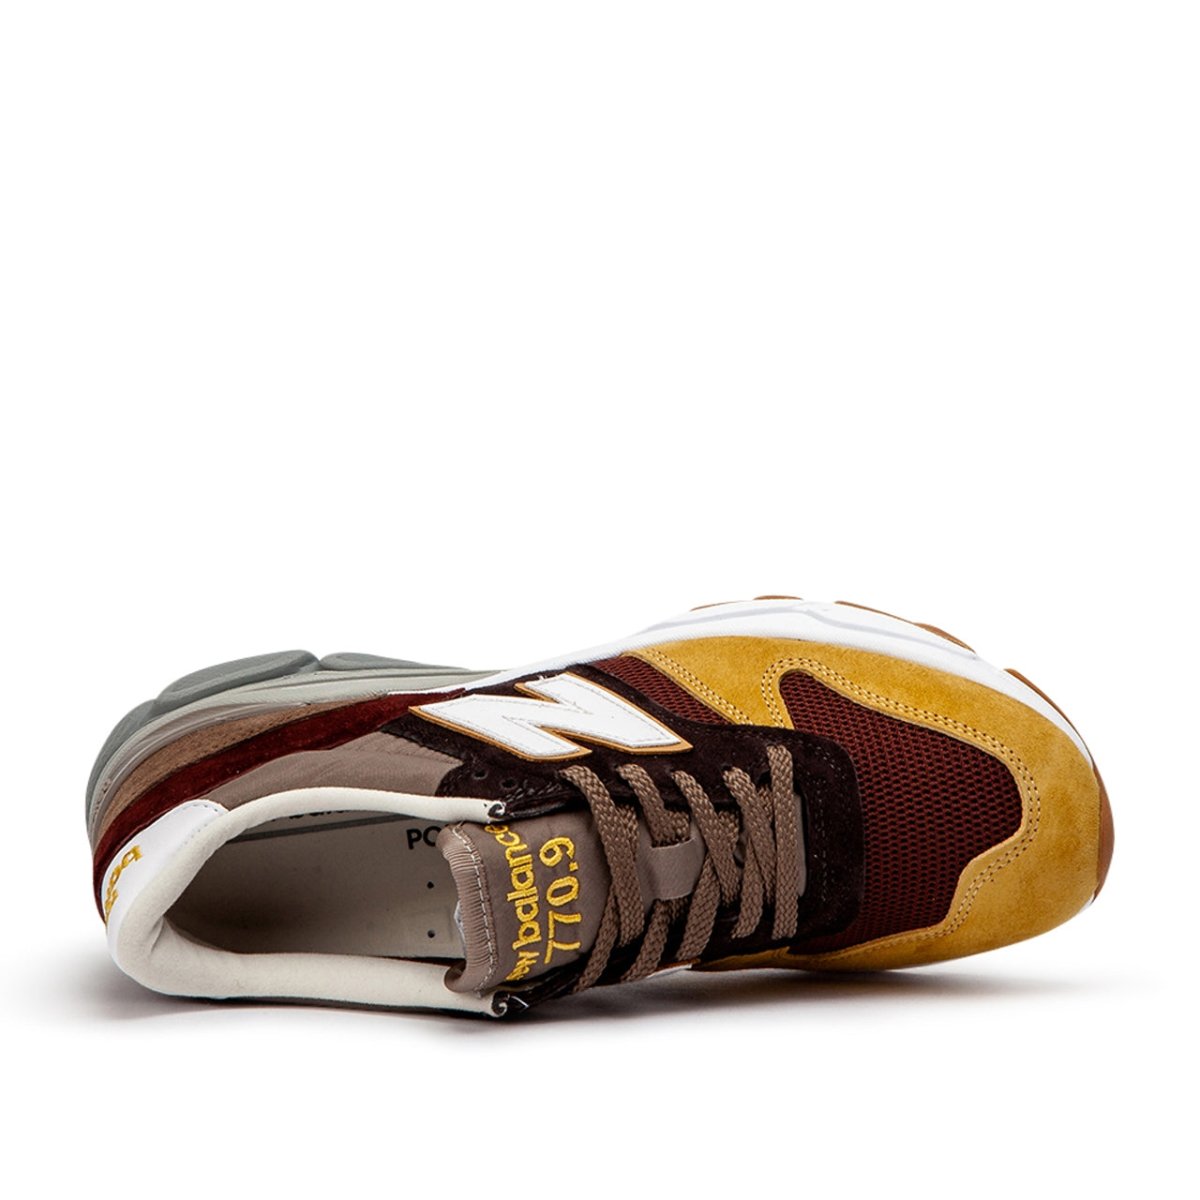 New Balance M7709FT Made in England 'Solway Excursion Pack' (Burgundy)  - Allike Store